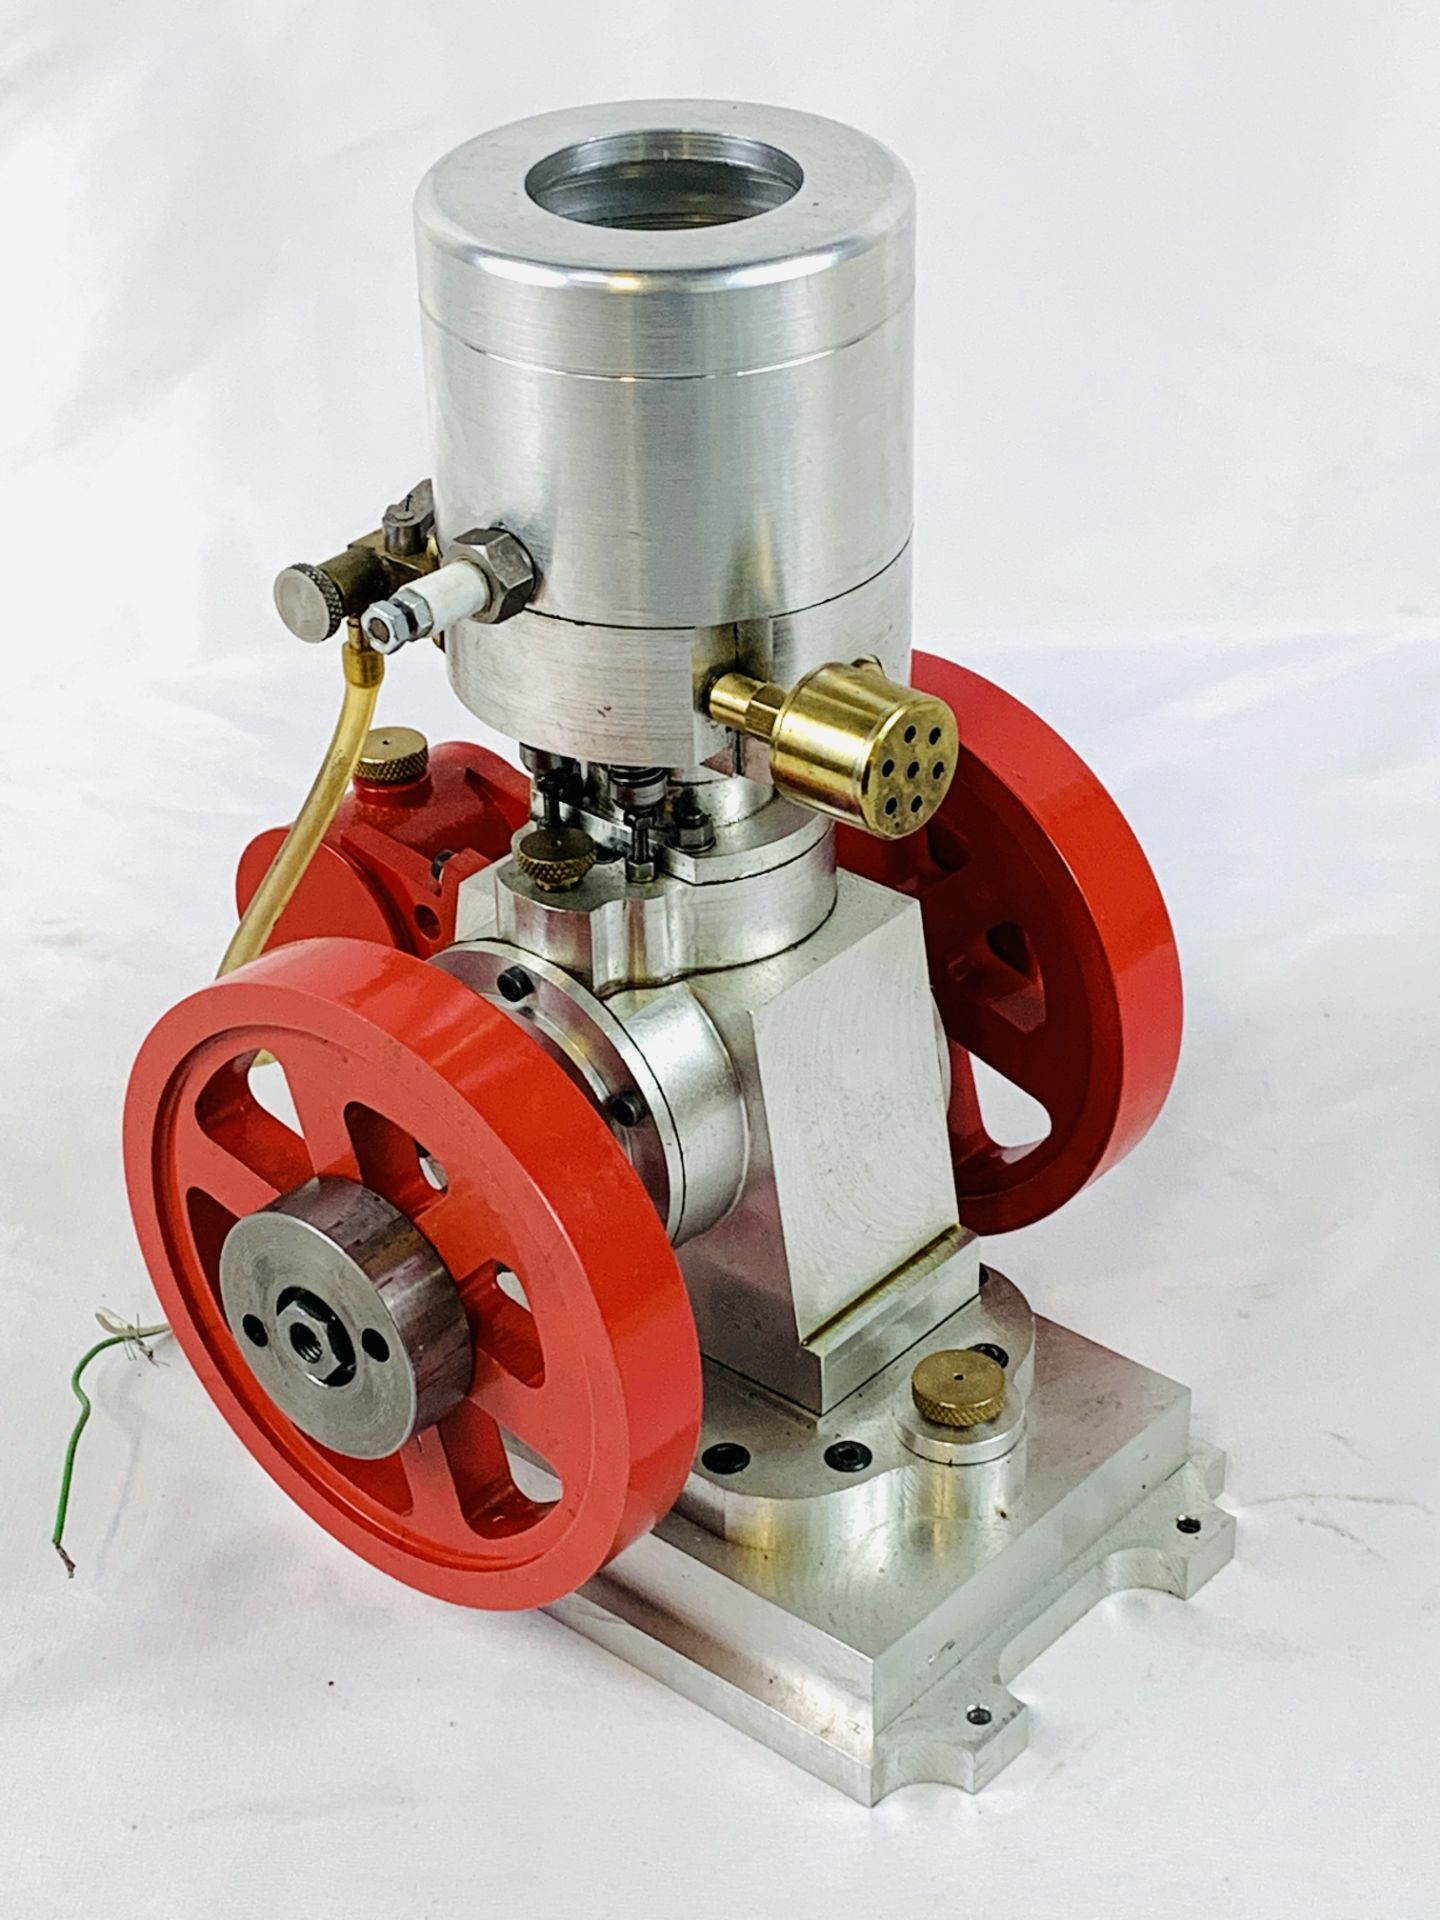 The Junior' vertical hopper cooled stationary internal combustion engine - Image 2 of 3